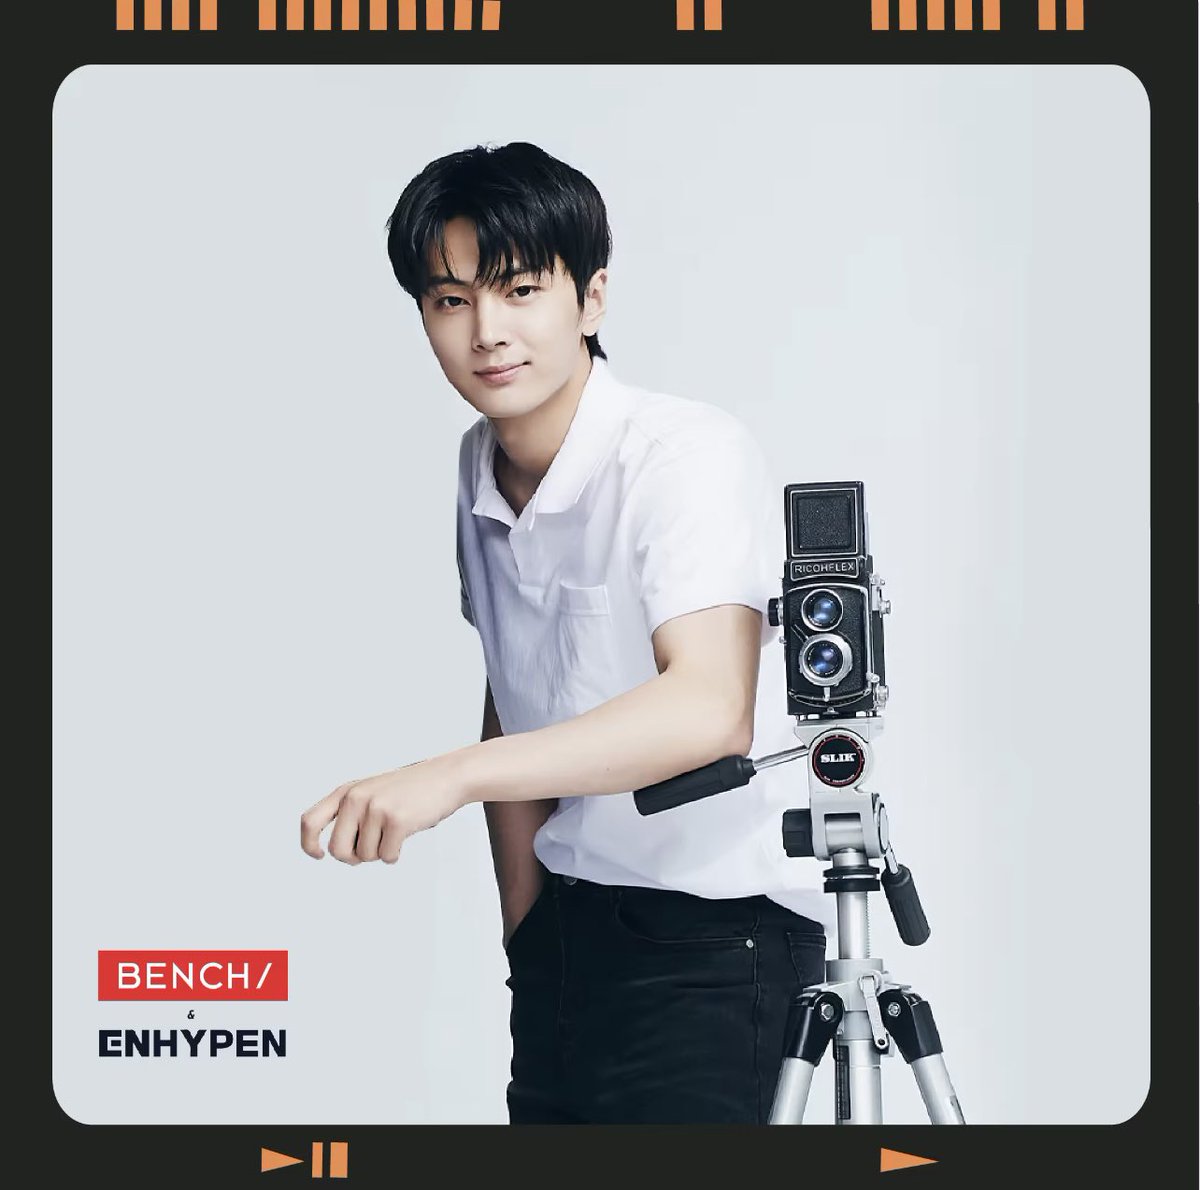 [PHOTO] 230701

BENCH's (@benchtm) latest collection #DENIMbyBENCH with #ENHYPEN is now available on Lazada!

JUNGWON:
• s.lazada.com.ph/s.SPKks
• s.lazada.com.ph/s.SPKlP
HEESEUNG:
• s.lazada.com.ph/s.SPKOm
• s.lazada.com.ph/s.SPKNd
• s.lazada.com.ph/s.SPKmg
JAY: 
•